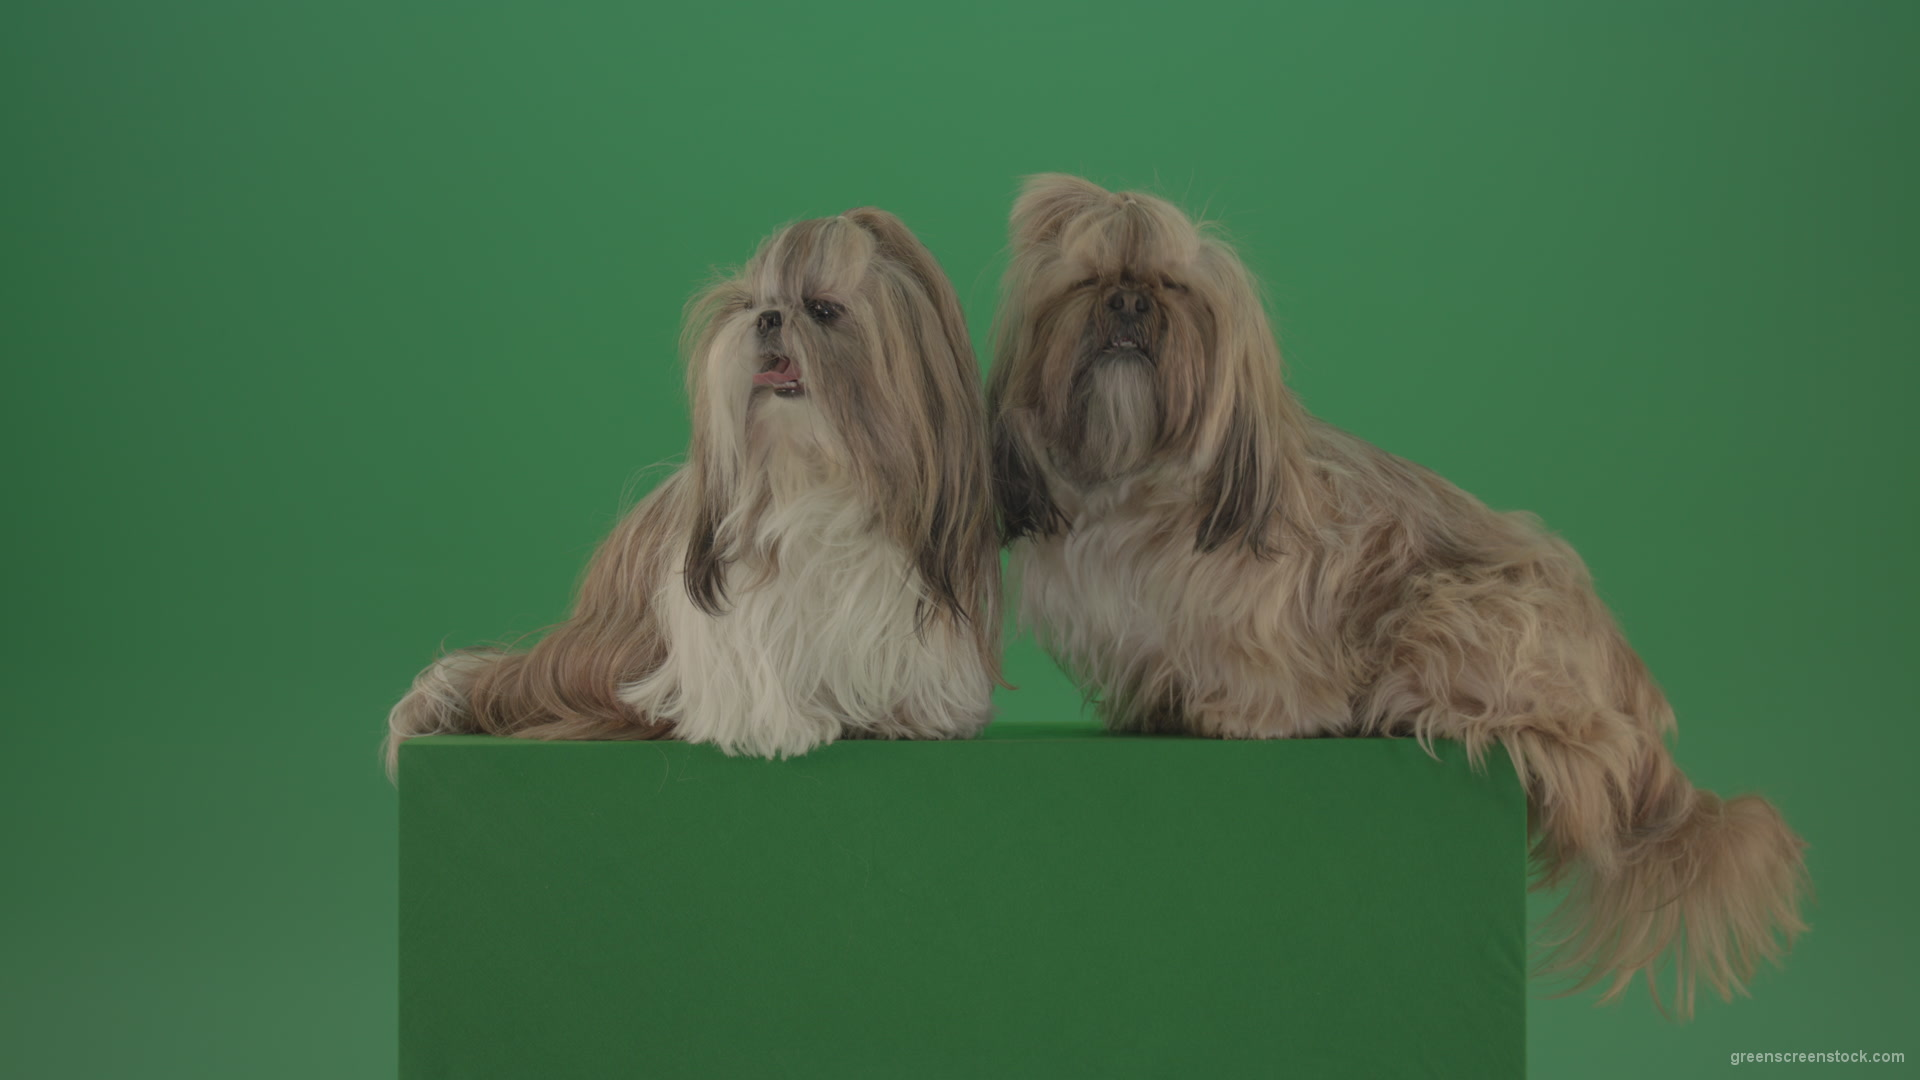 Two-cute-Shih-Tzu-Small-toy-dogs-yawling-and-sitting-on-green-screen-4K_001 Green Screen Stock